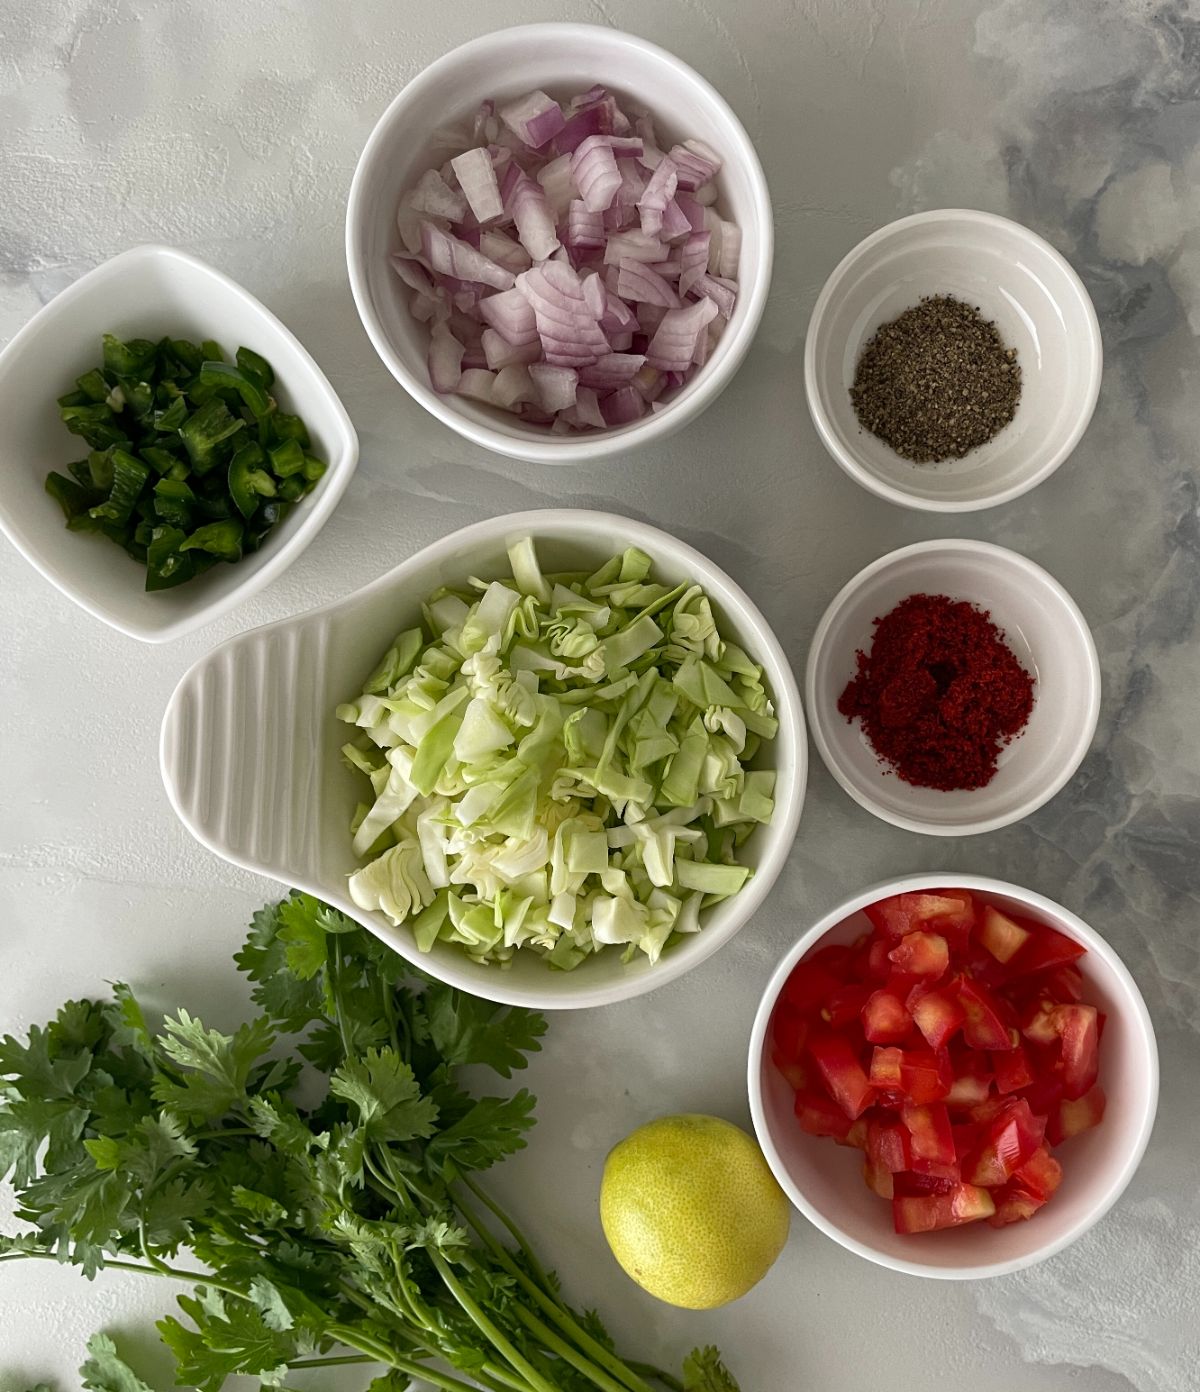 ingredients for the cabbage pico de gallo